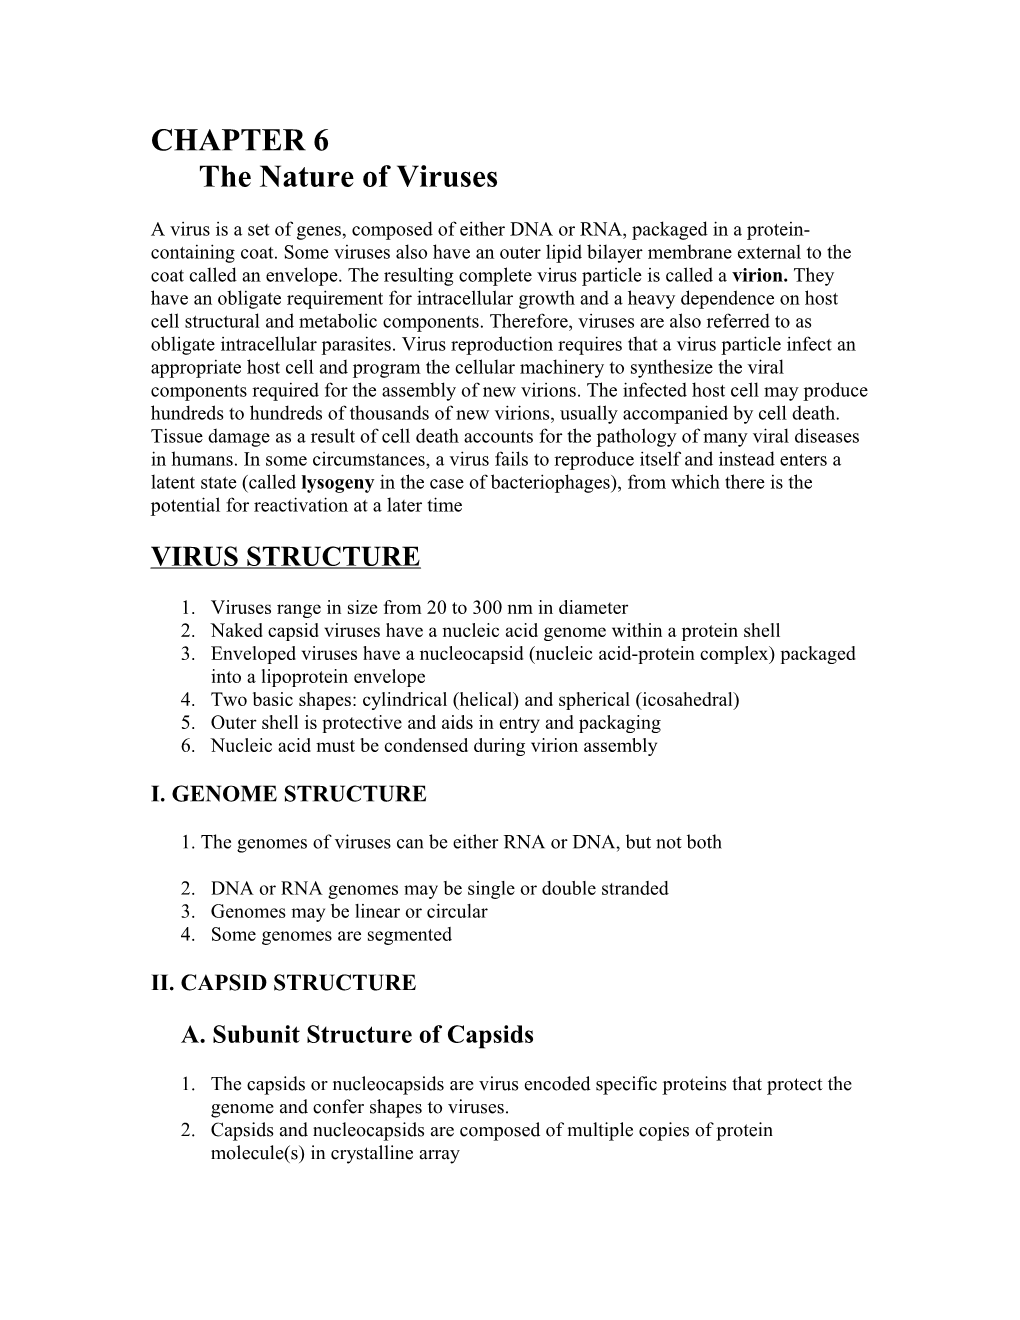 CHAPTER 6The Nature of Viruses